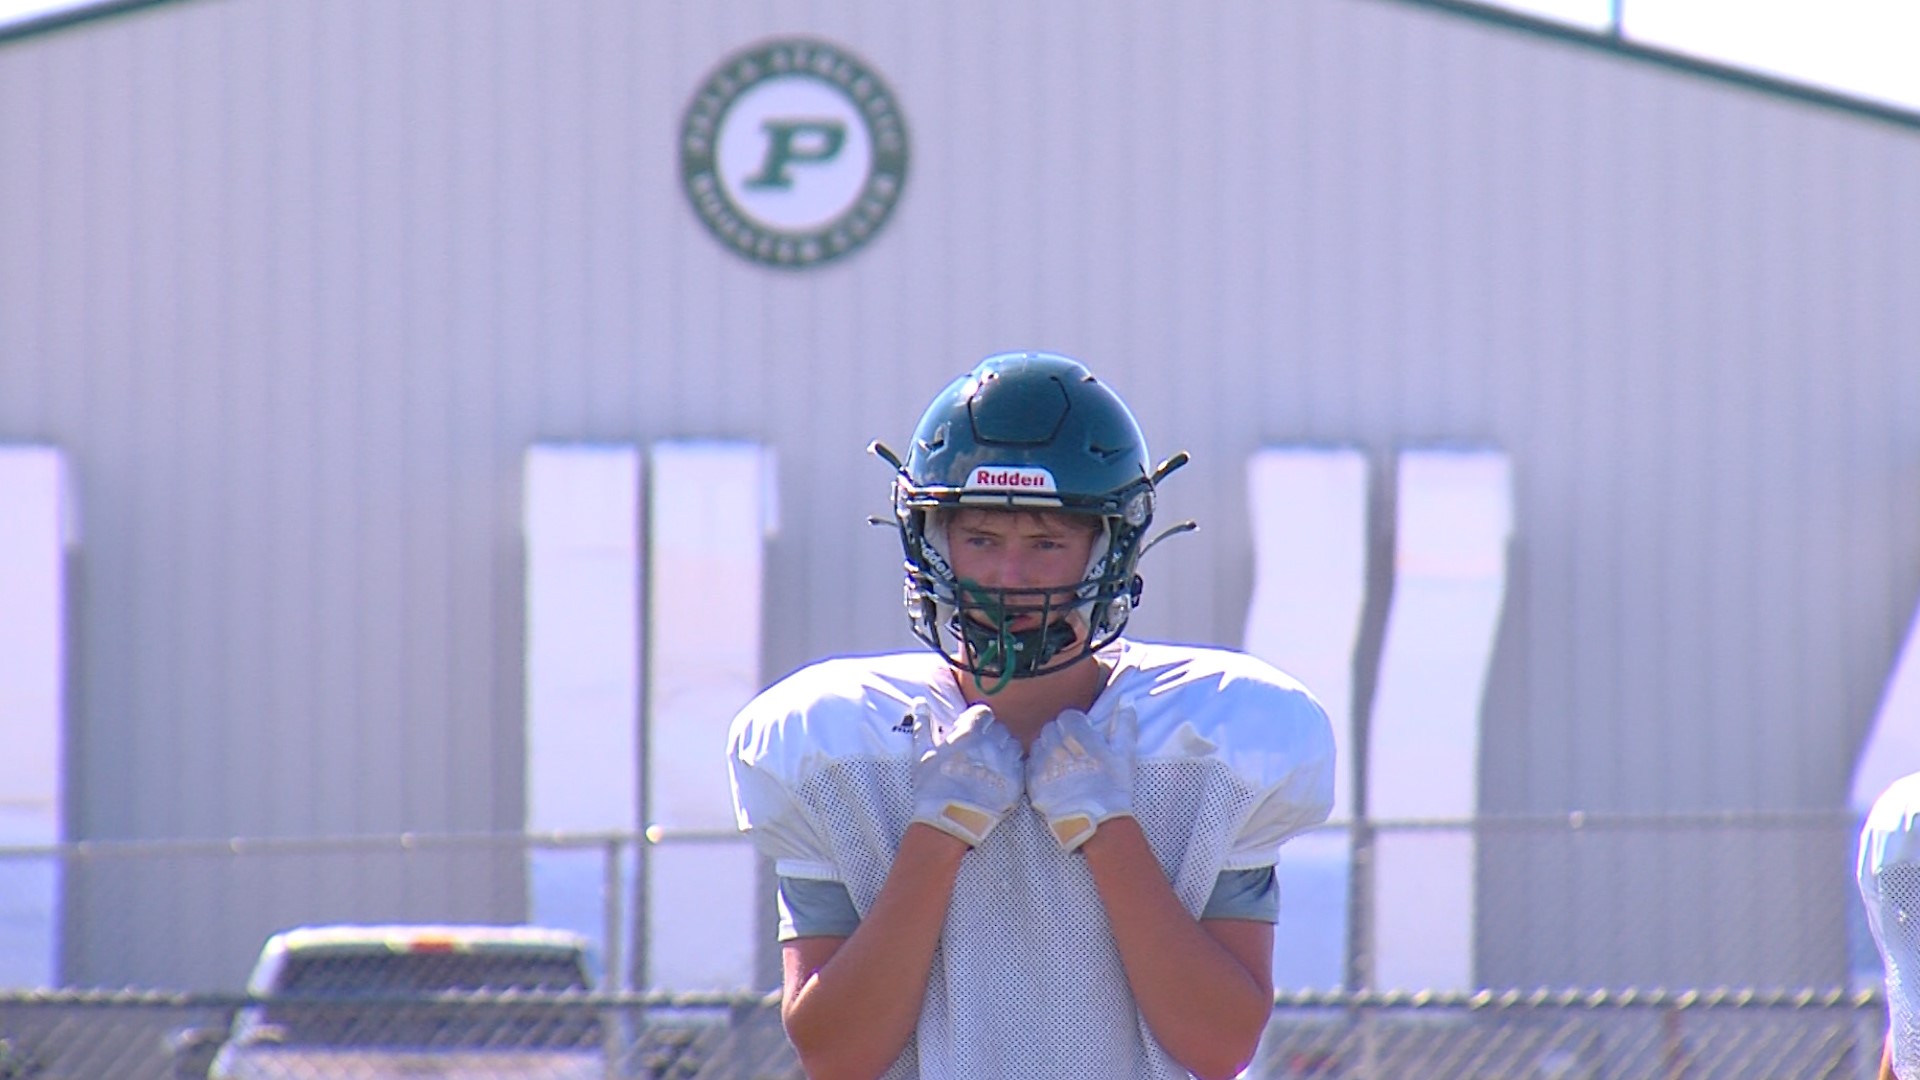 Pella is a few years removed from their last football title, but expectations remain high for the Dutch as they get ready for every opponent's best shot